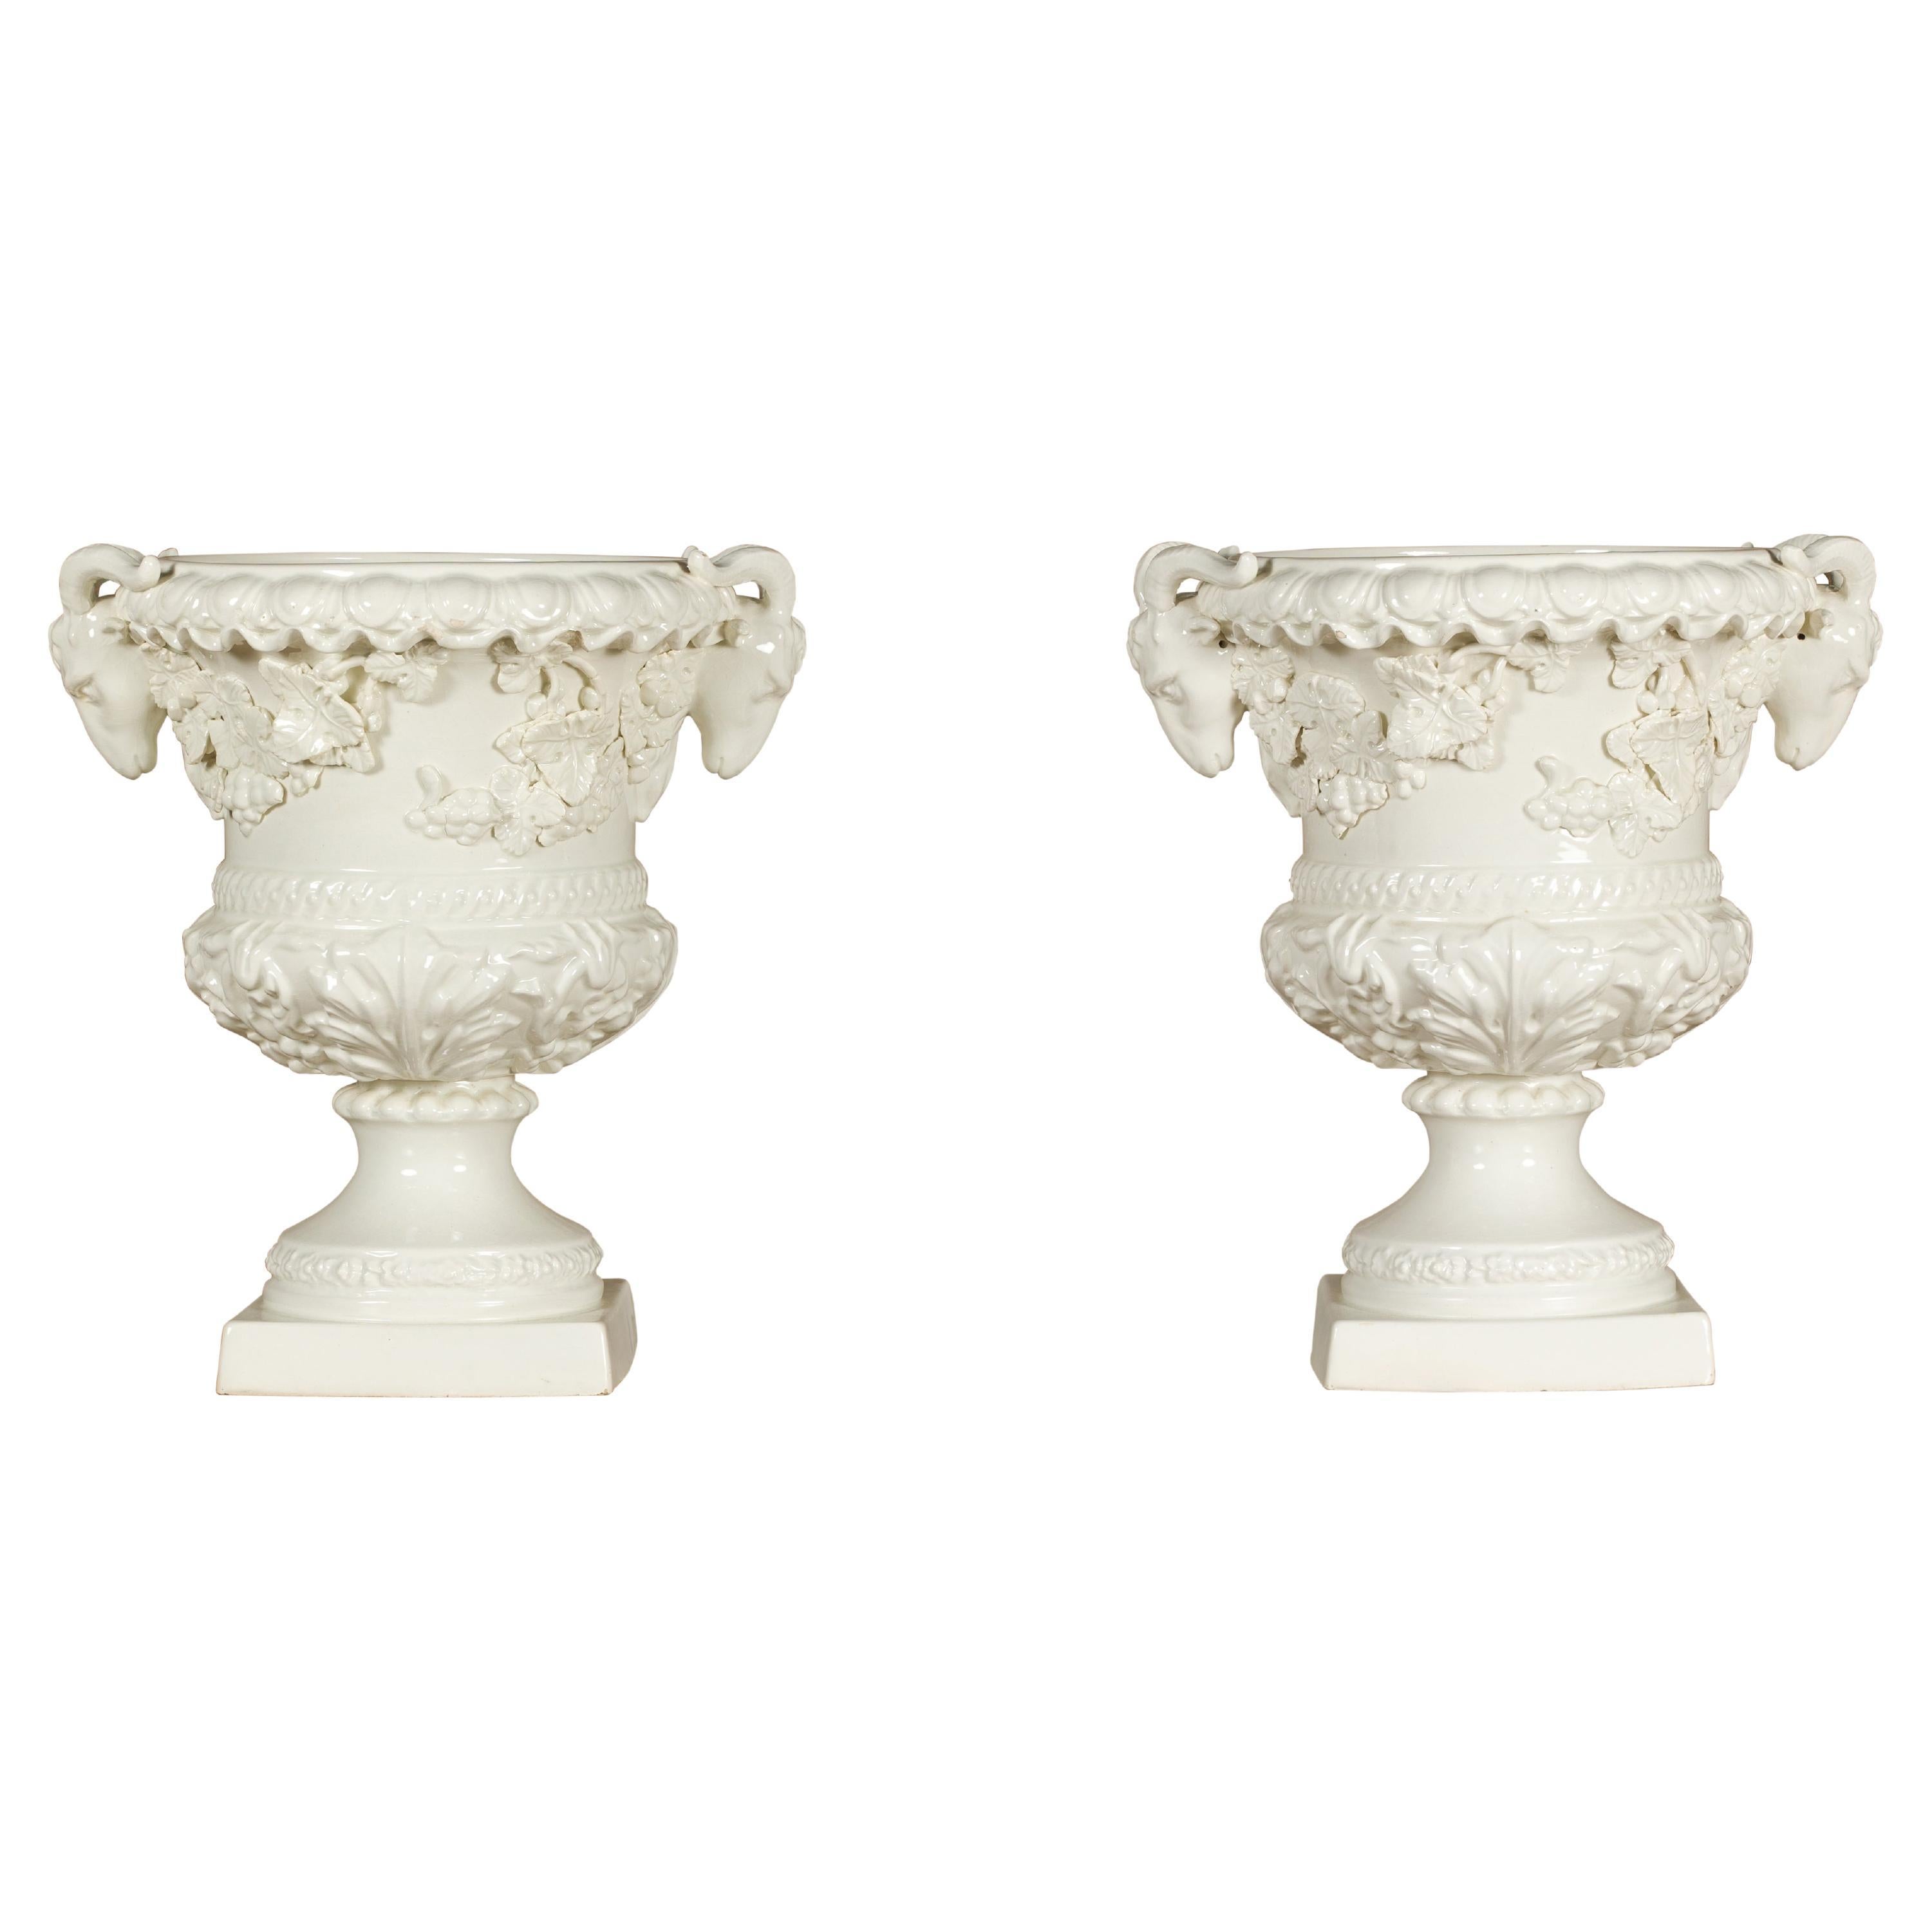 Pair of Blanc de Chine Midcentury Urns with Rams Heads and Ivy Leaves For Sale